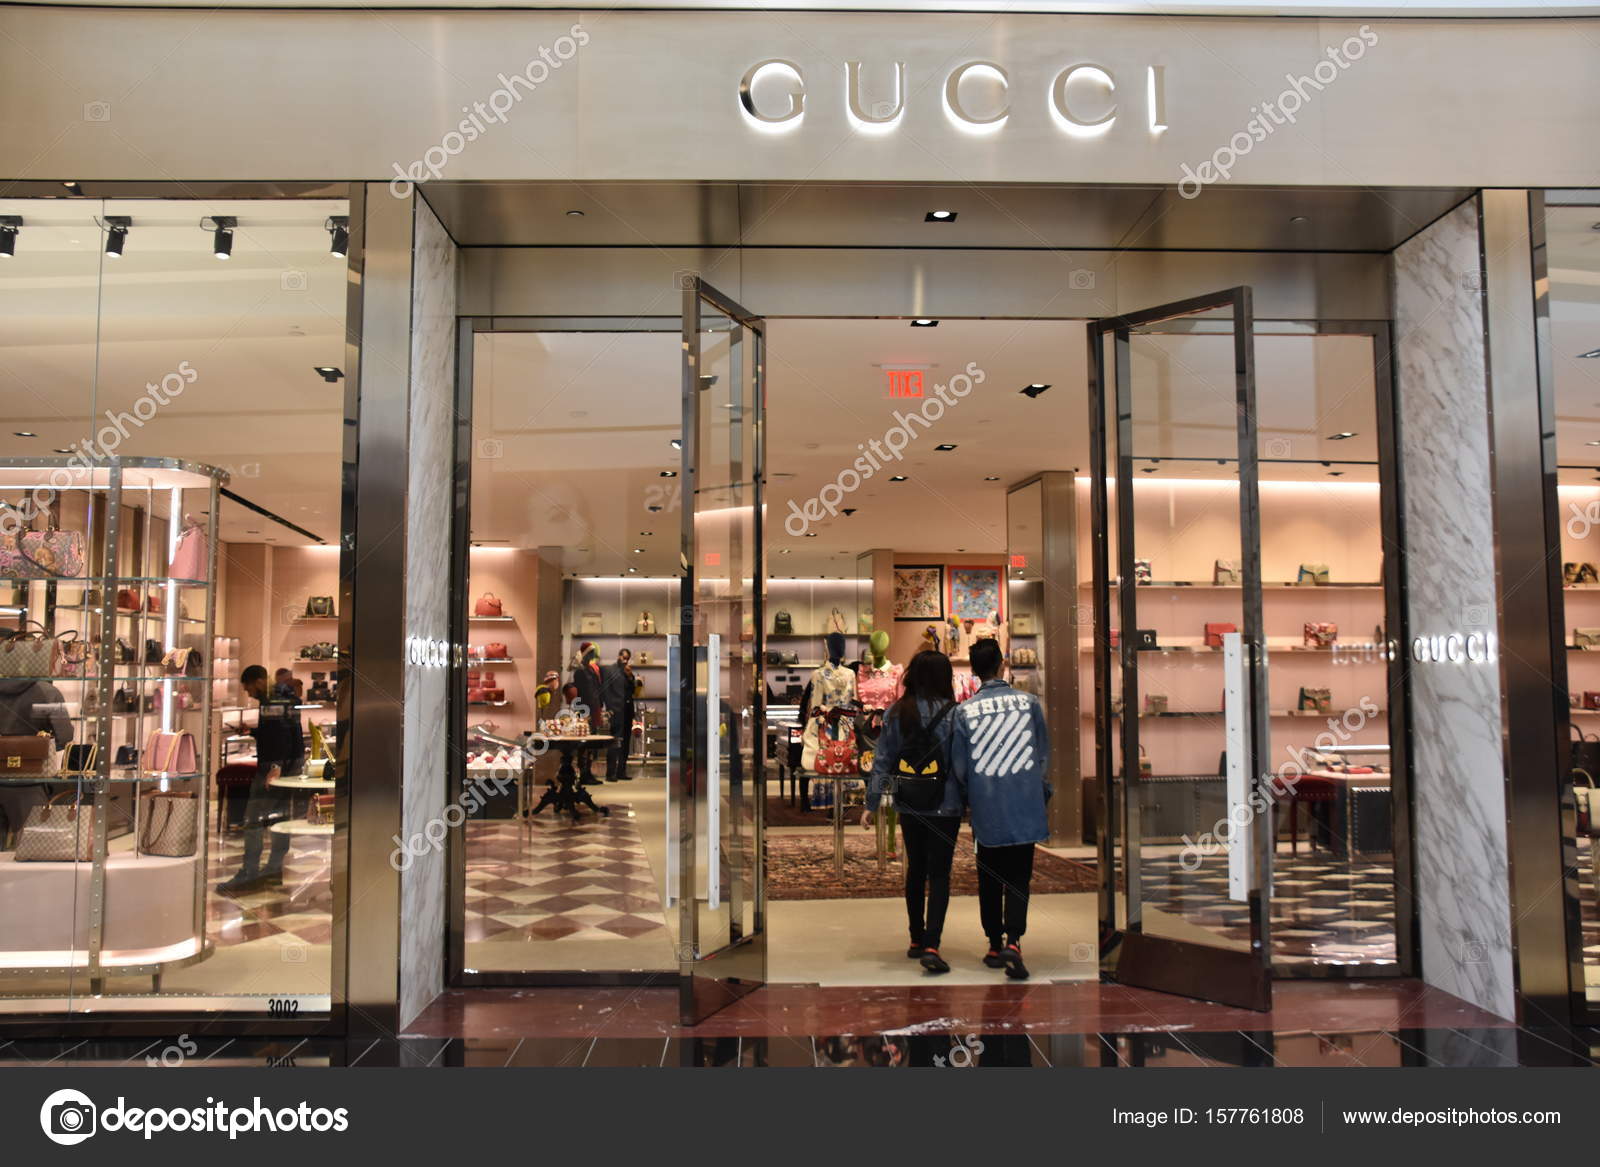 gucci in roosevelt field mall